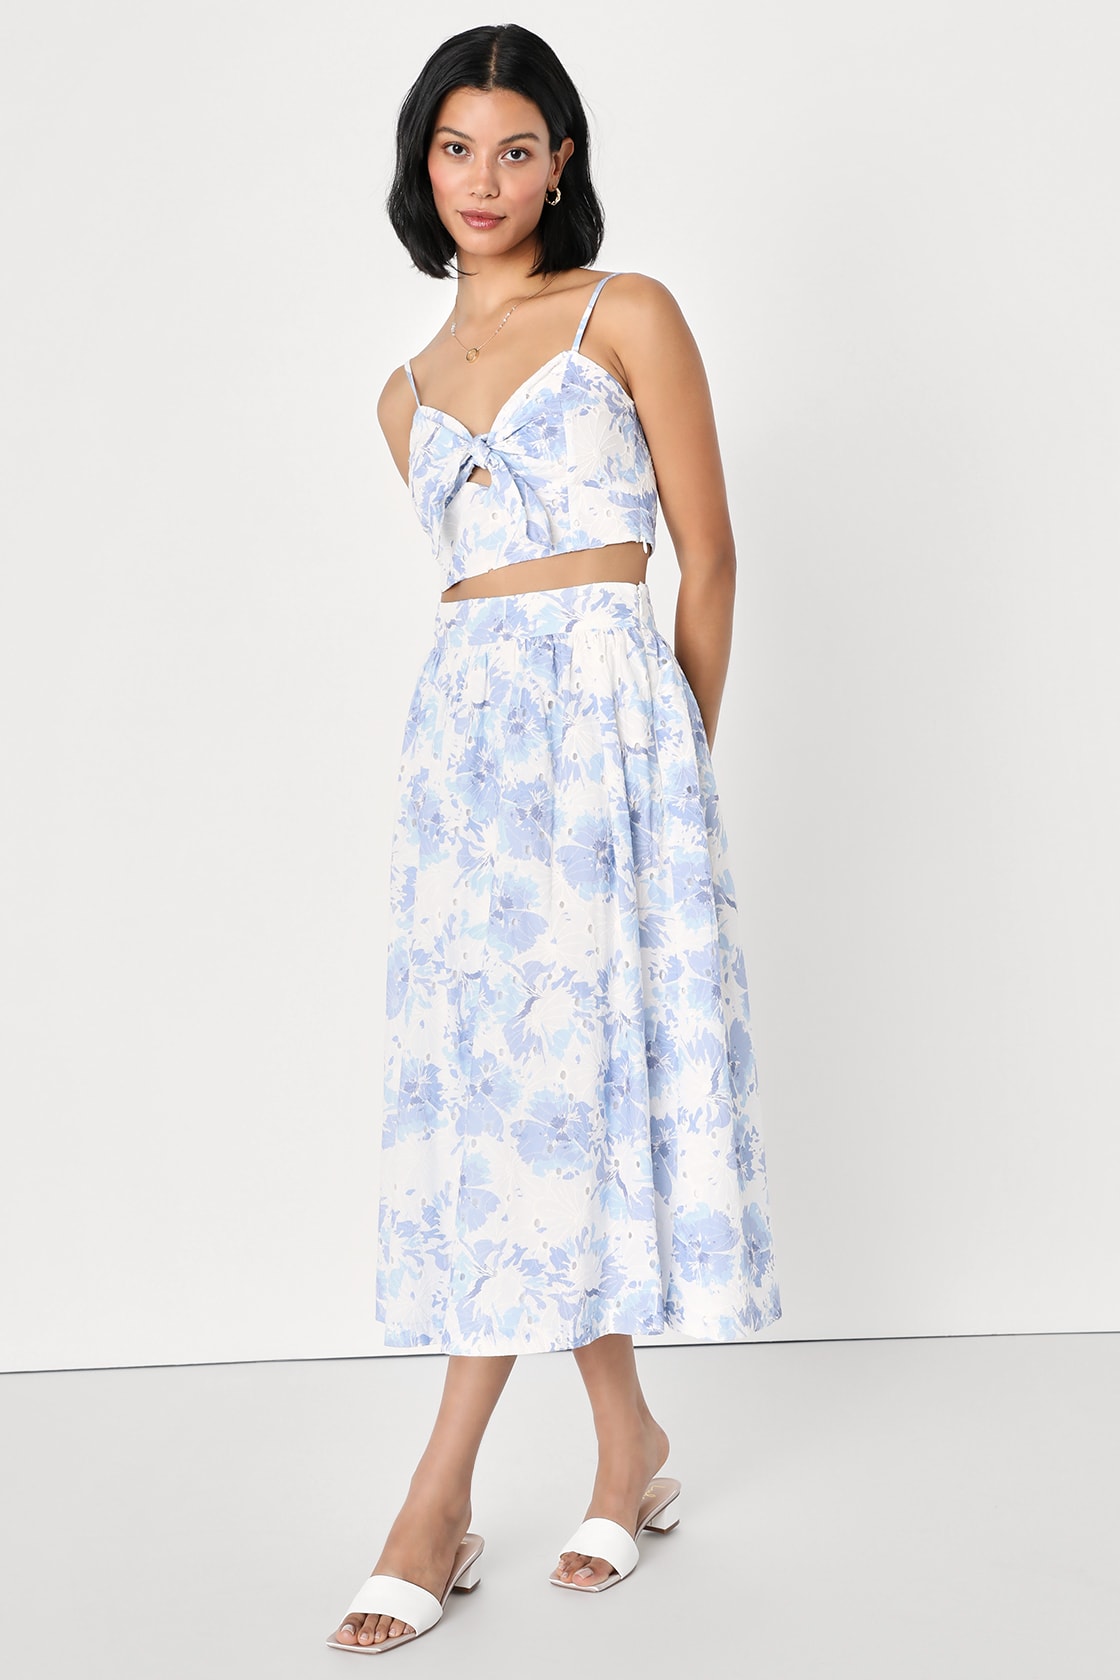 Simple Darling White and Blue Eyelet Embroidered Two-Piece Dress